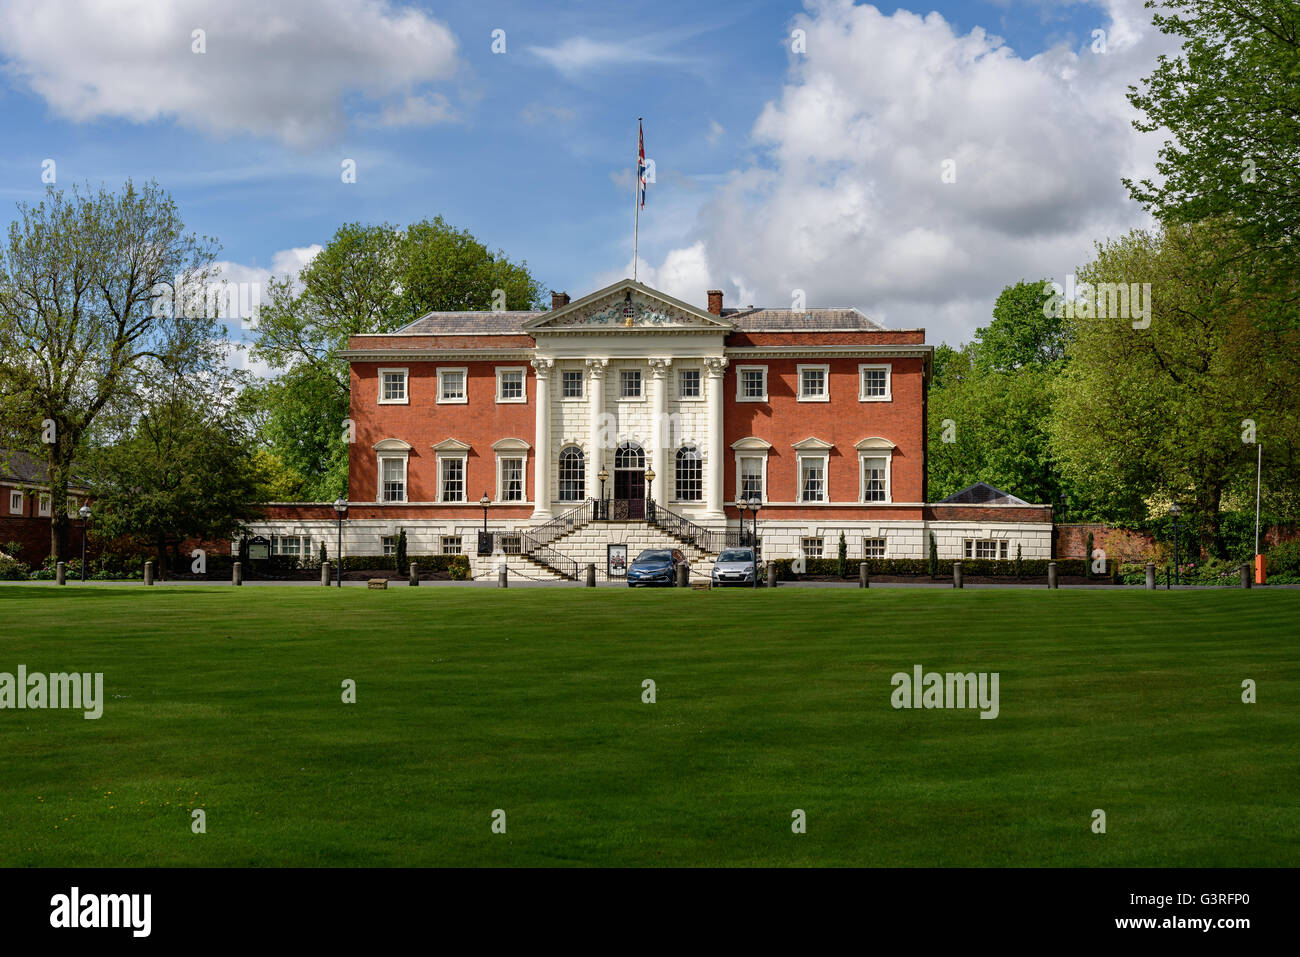 The Warrington town hall designed by architect  James Gibbs is located in Warrington, England. Stock Photo